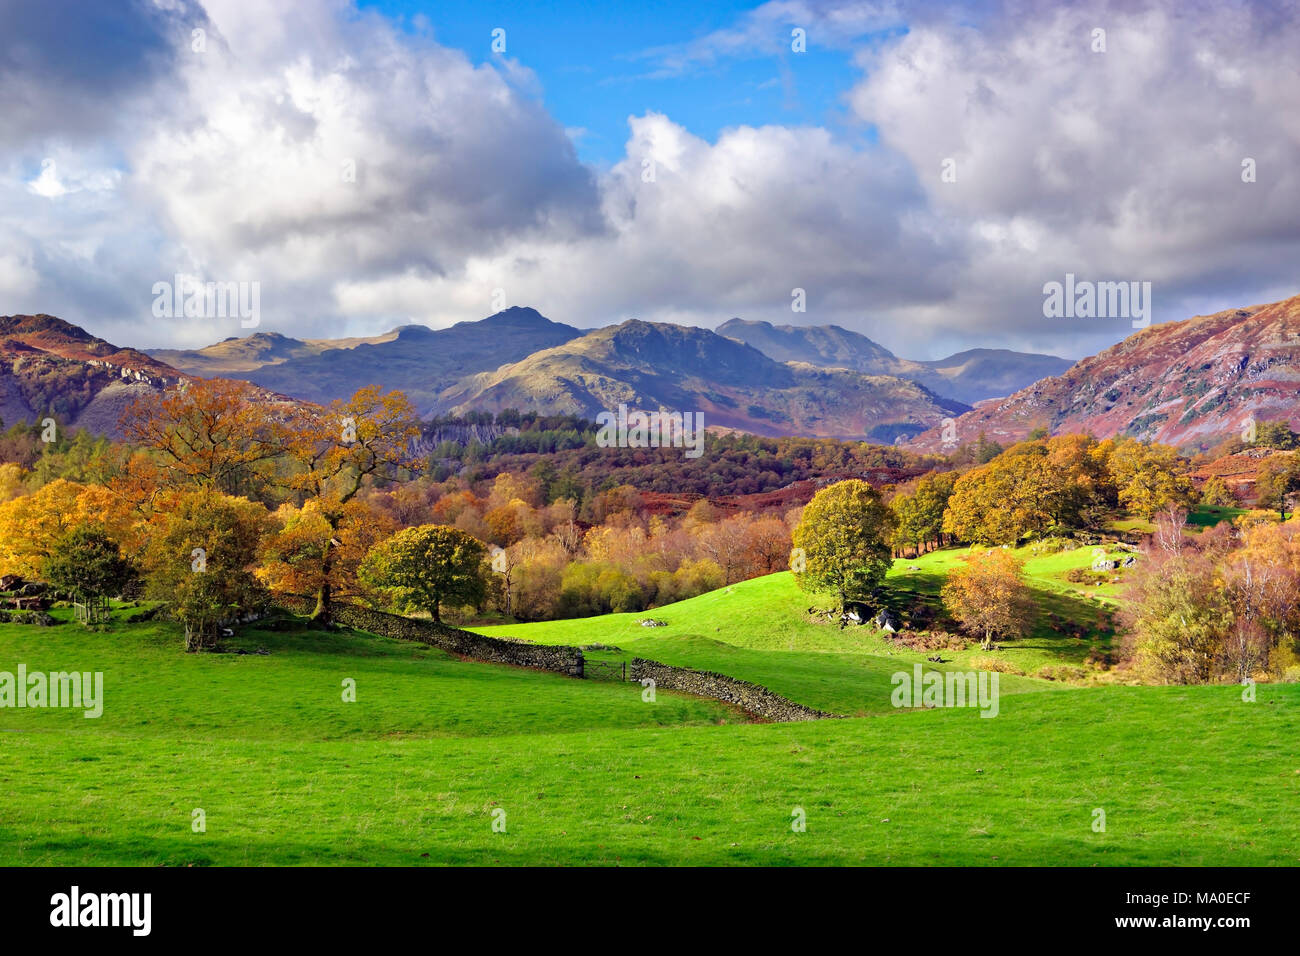 A colourful autumn view of the Lake District countryside near Skelwith Bridge, Cumbria, England. Stock Photo